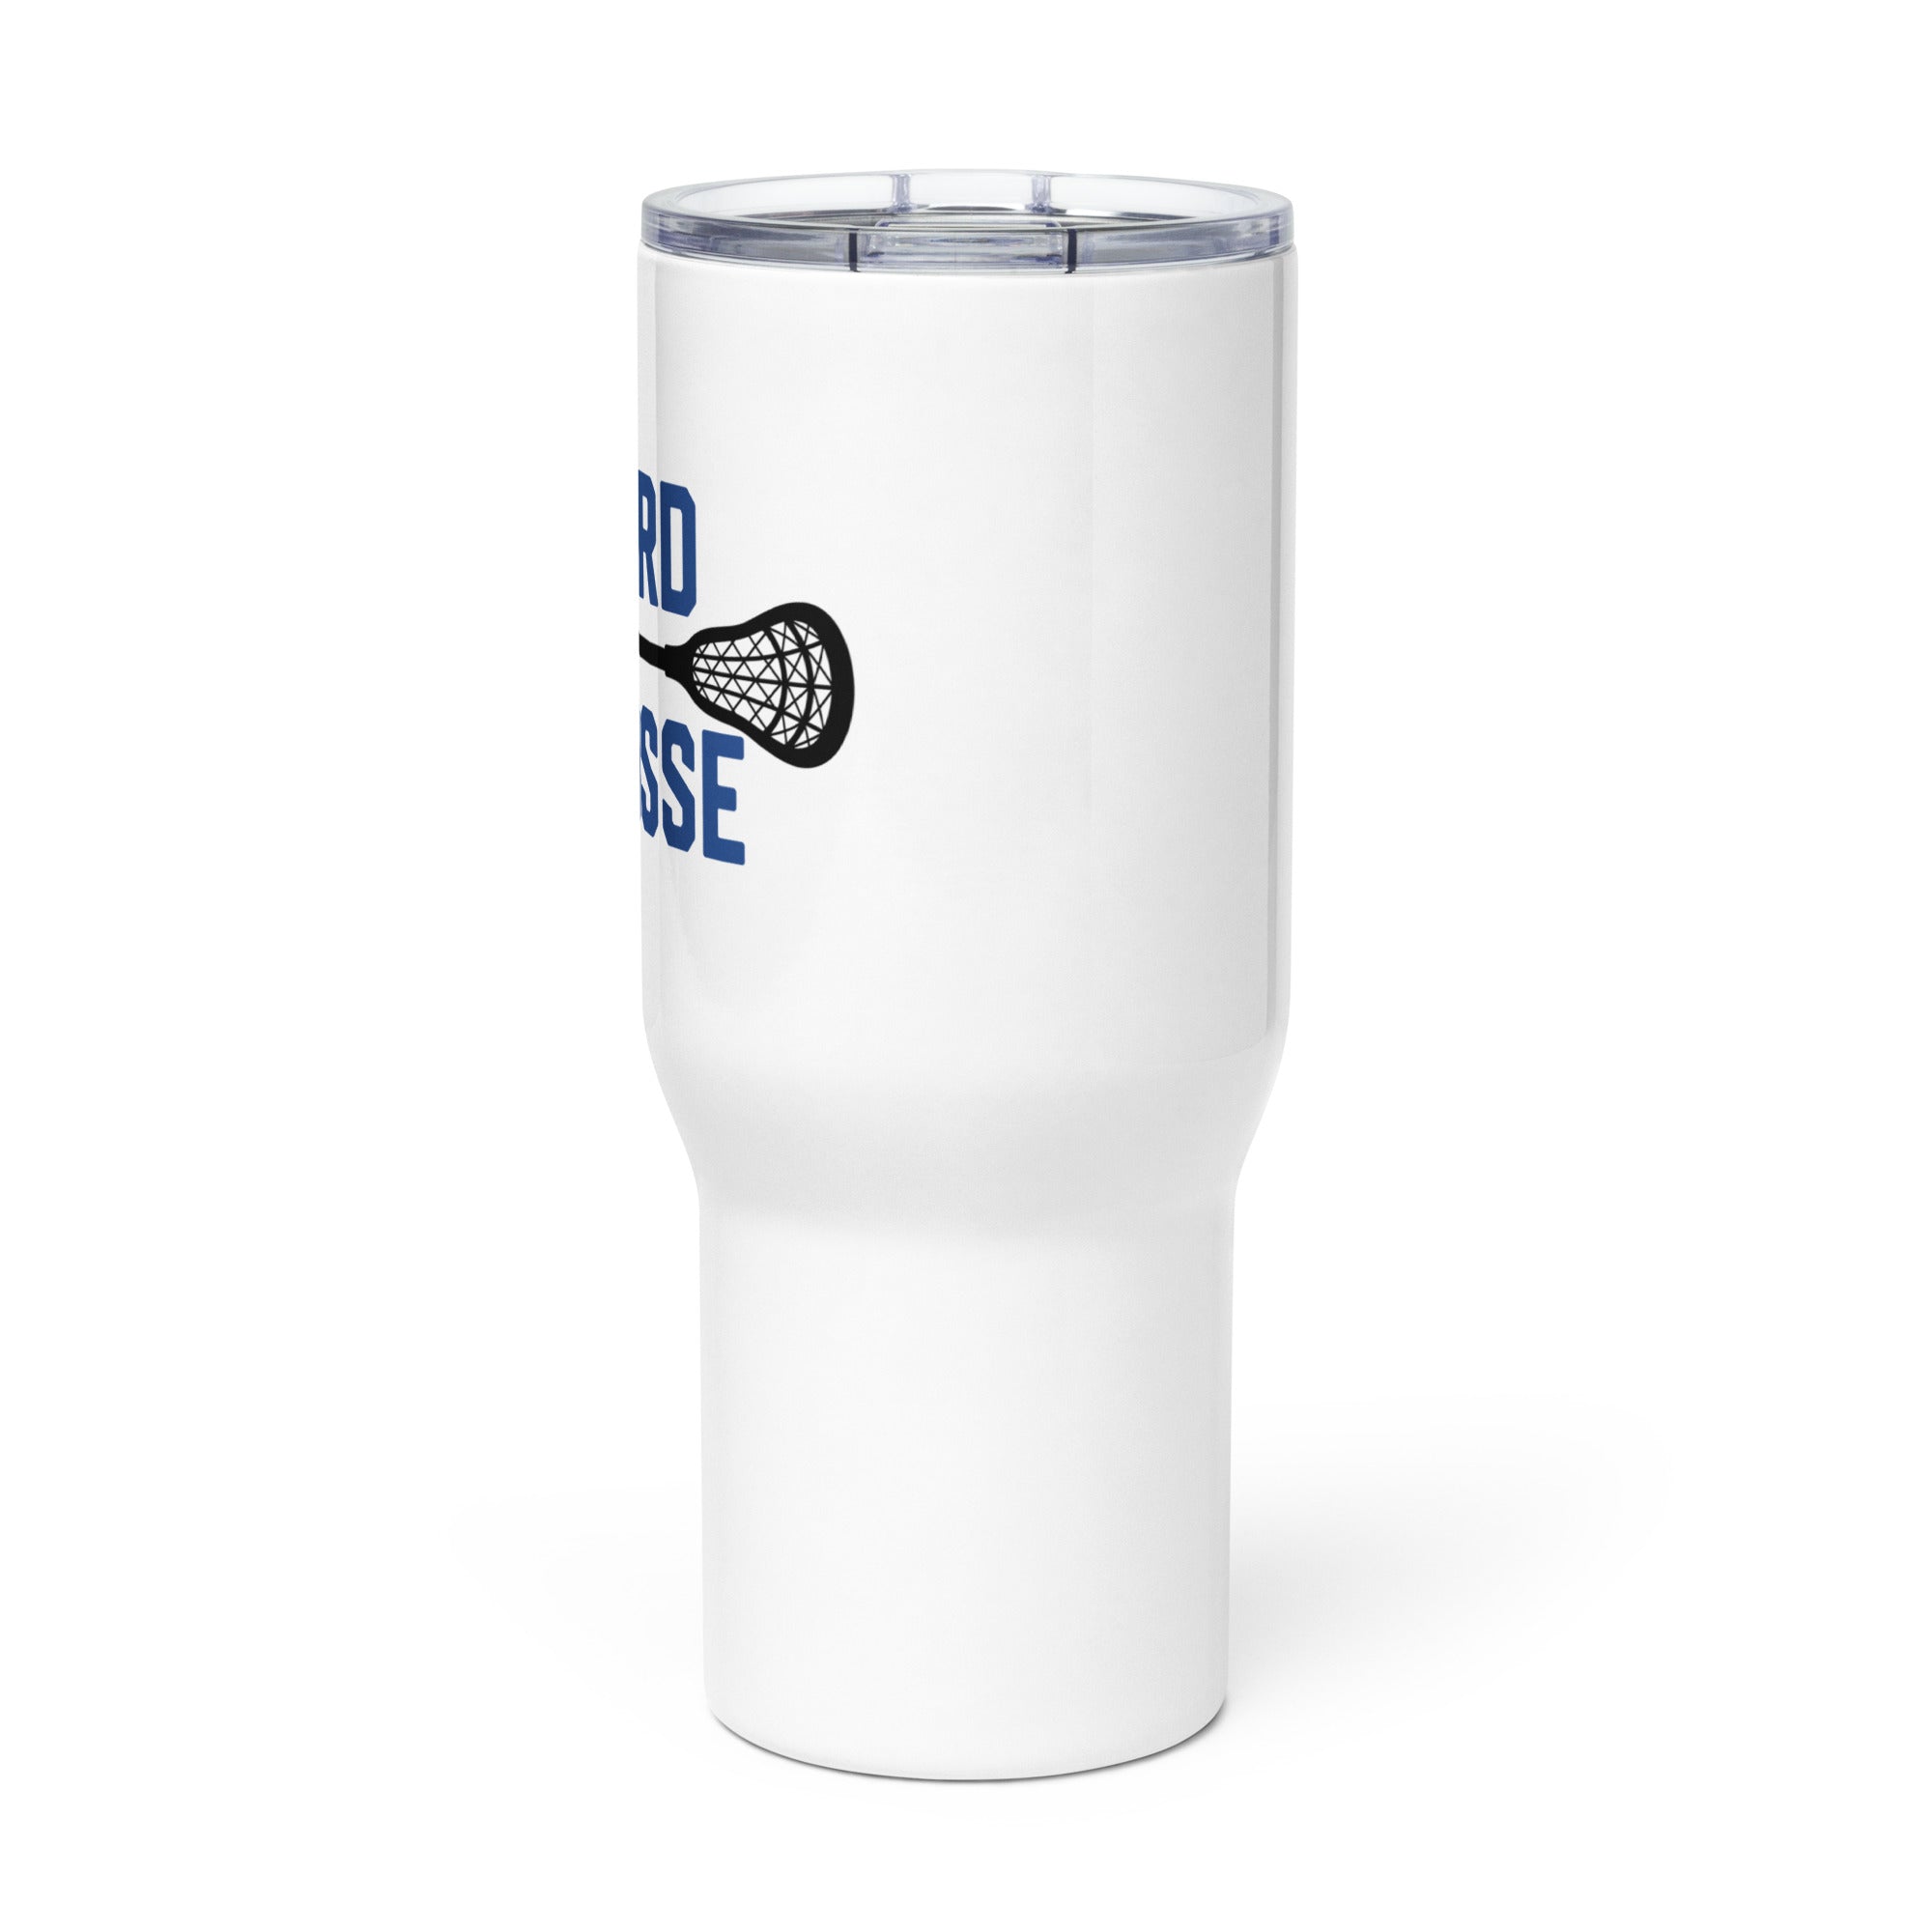 Bedford Travel mug with a handle